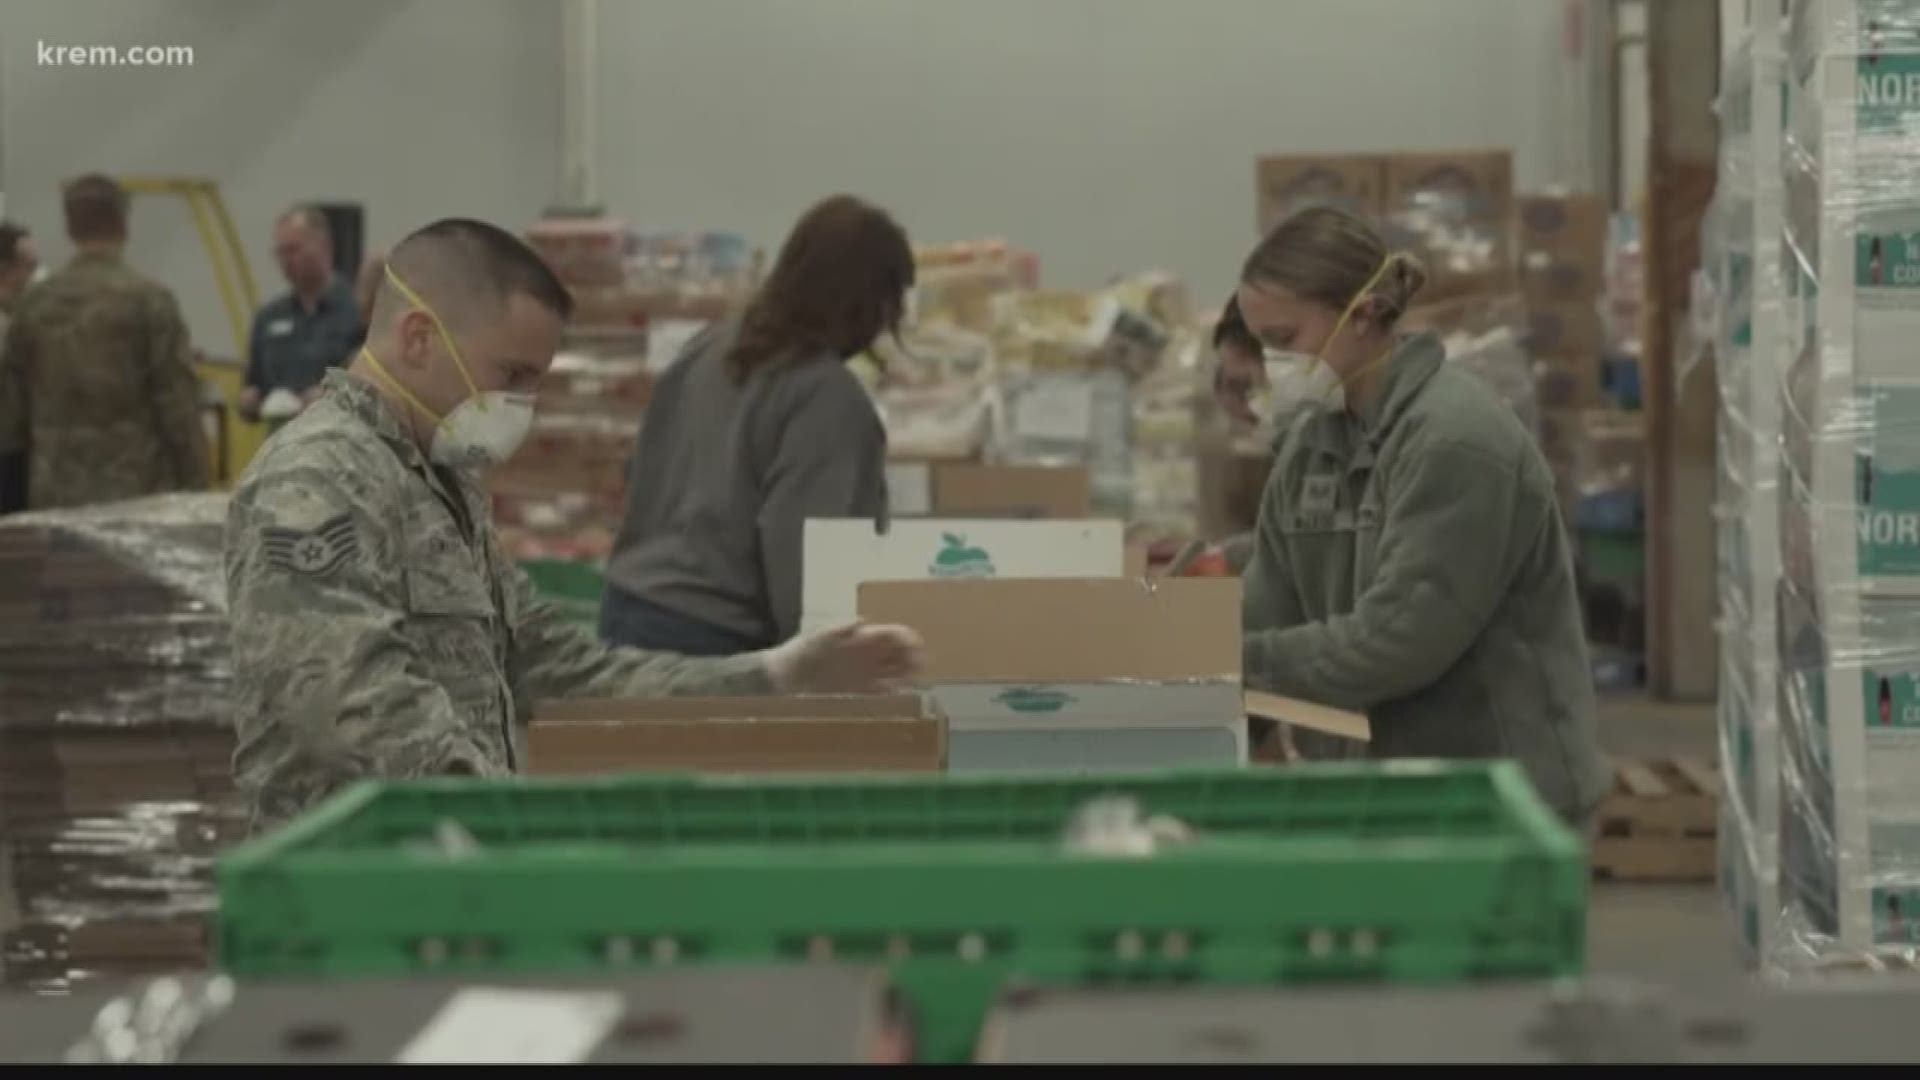 Second Harvest Inland Northwest’s number of volunteers took a hit during the coronavirus crisis, so members of the National Guard stepped in to help.